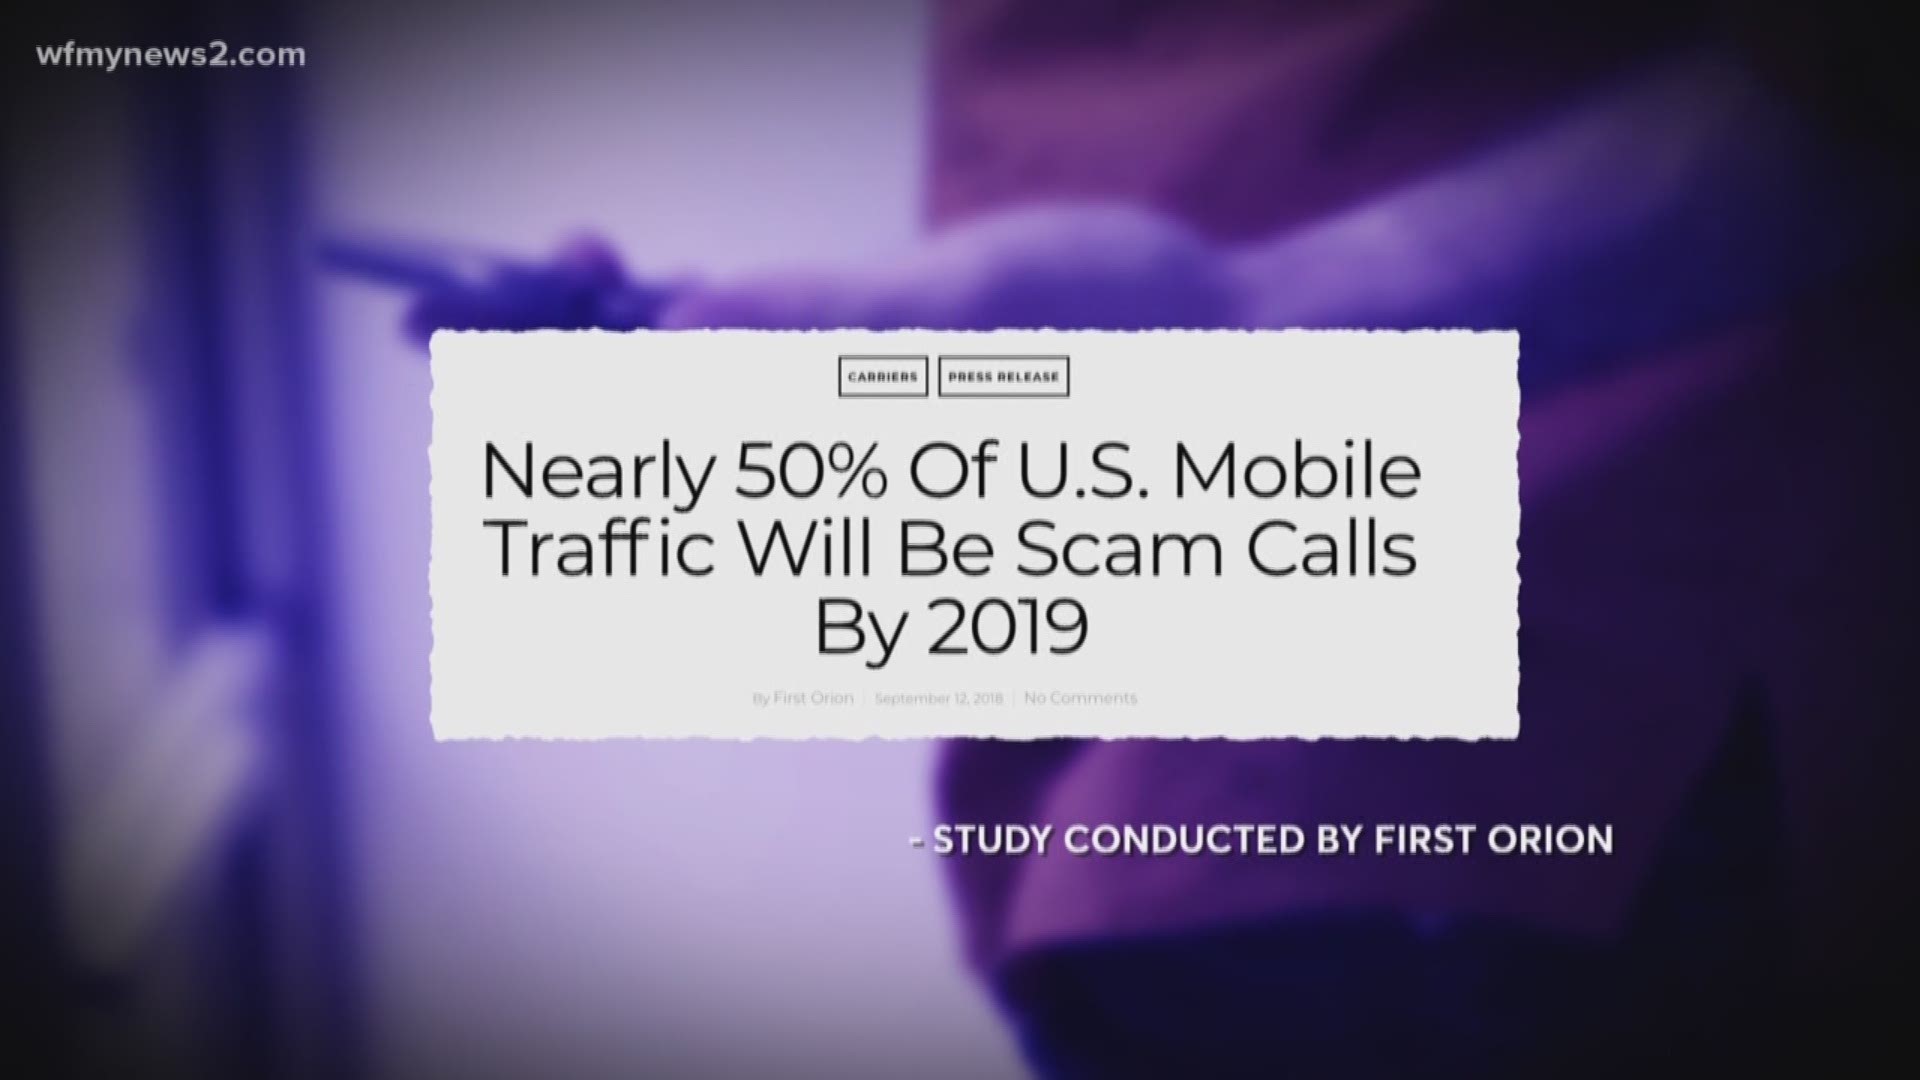 Technology on the horizon could stop spoofed scam calls.